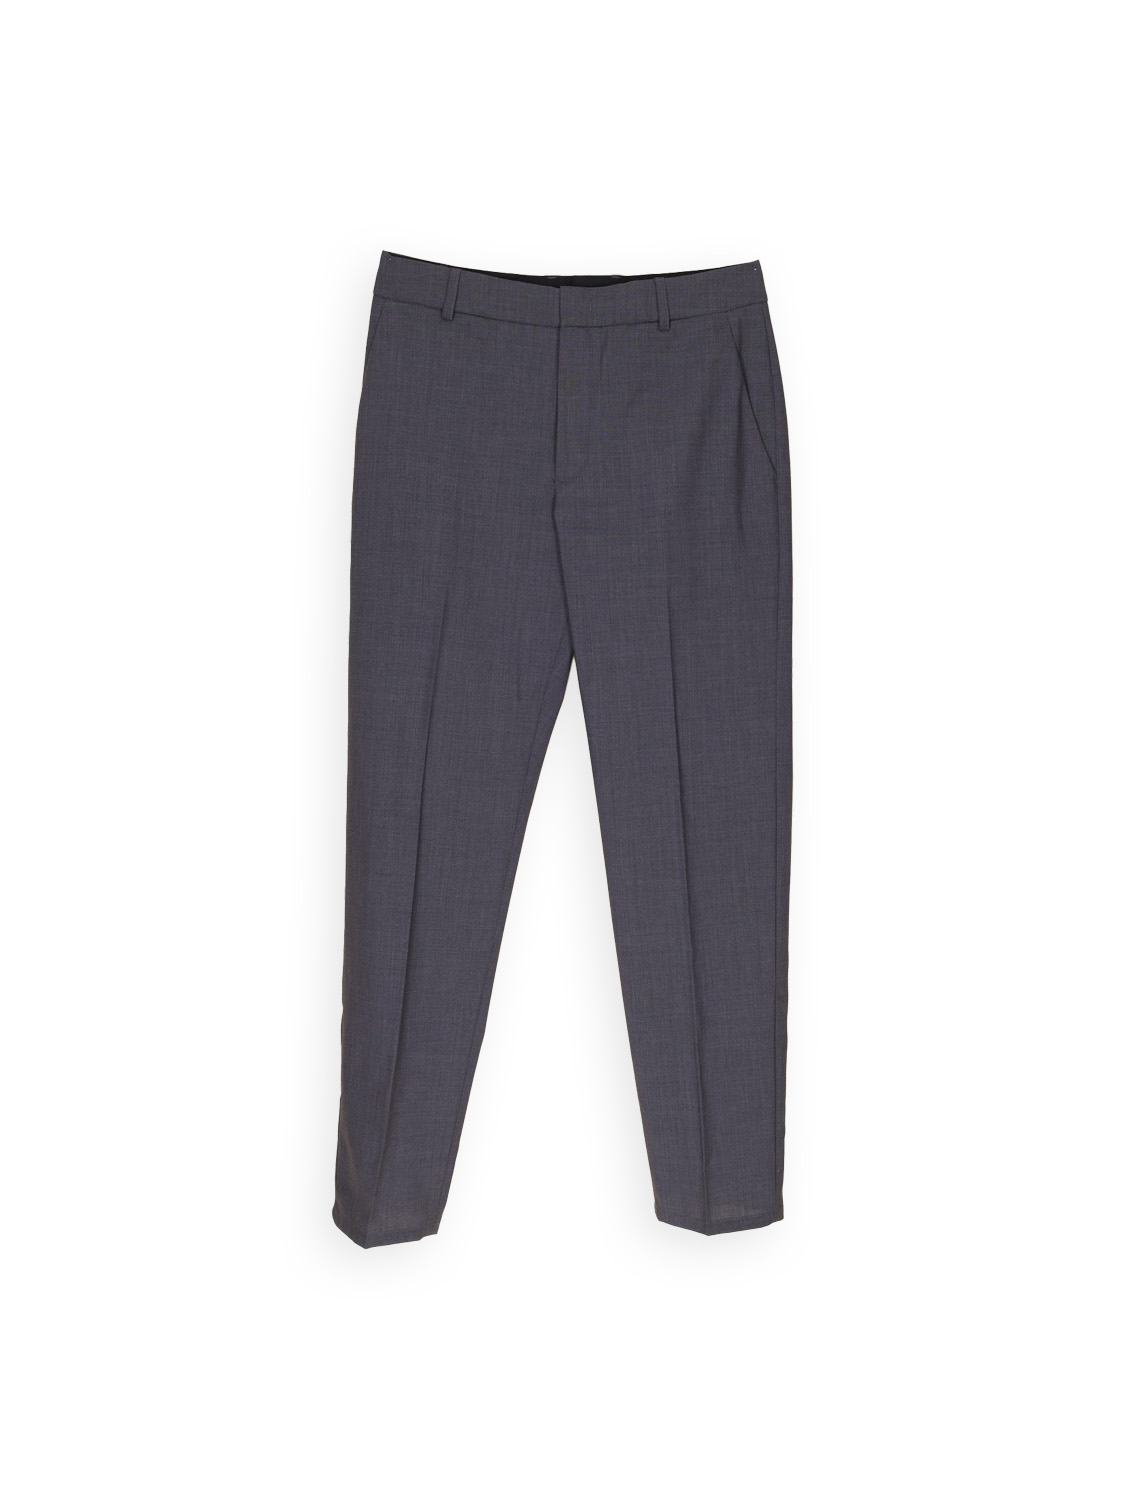 Pleated trousers made of virgin wool 